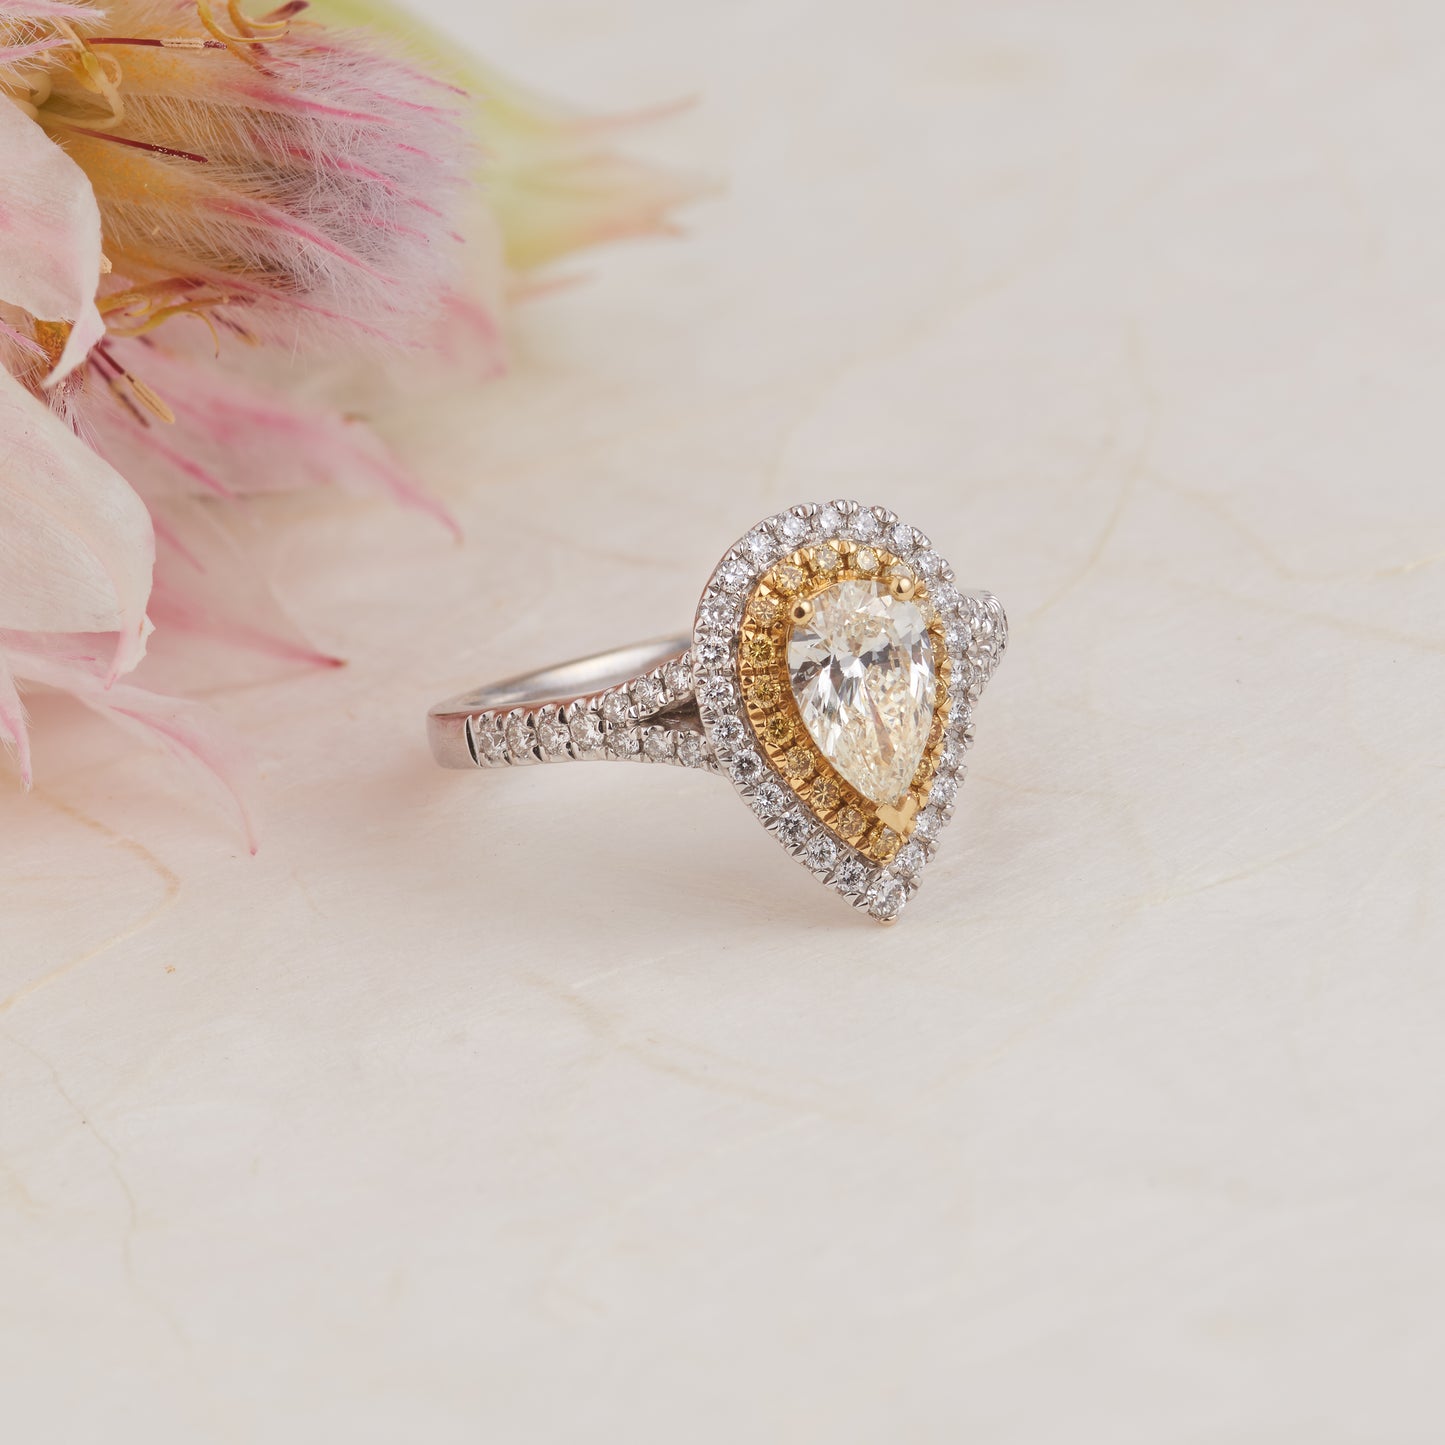 18K White and Yellow Gold Pear Yellow Diamond Double Halo Engagement Ring 1.5tdw